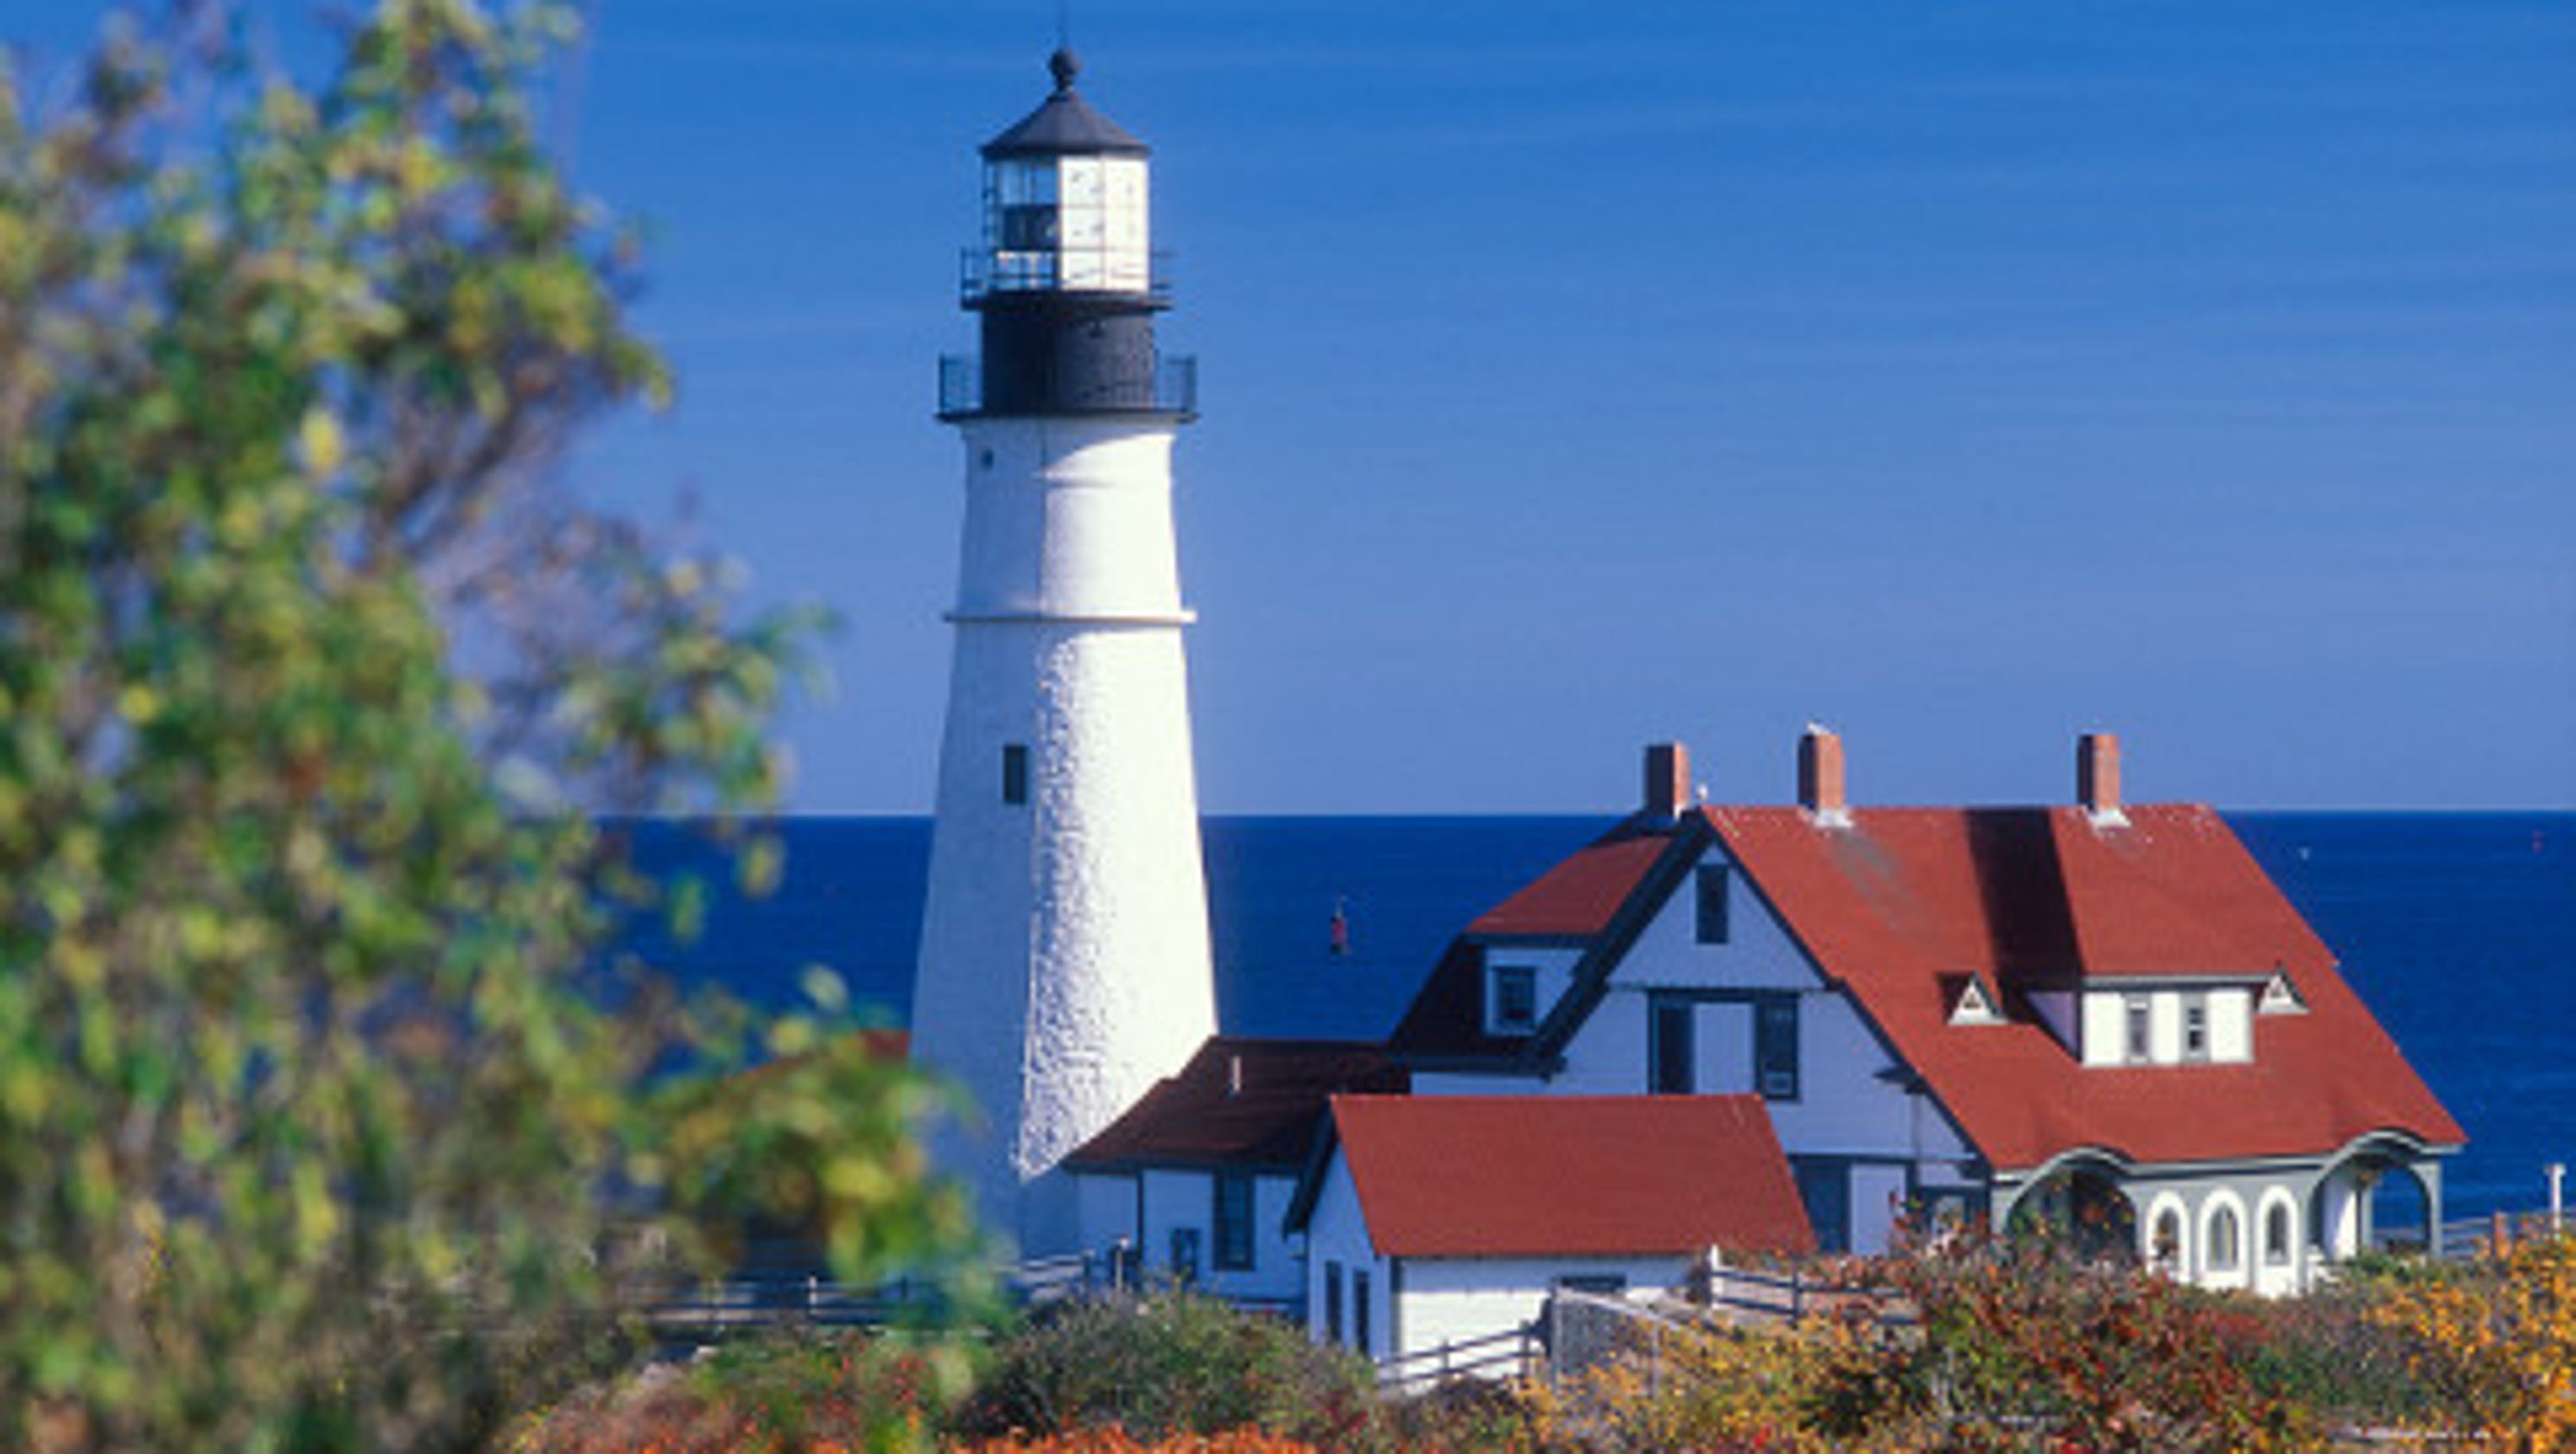 Maine's scenic lighthouses